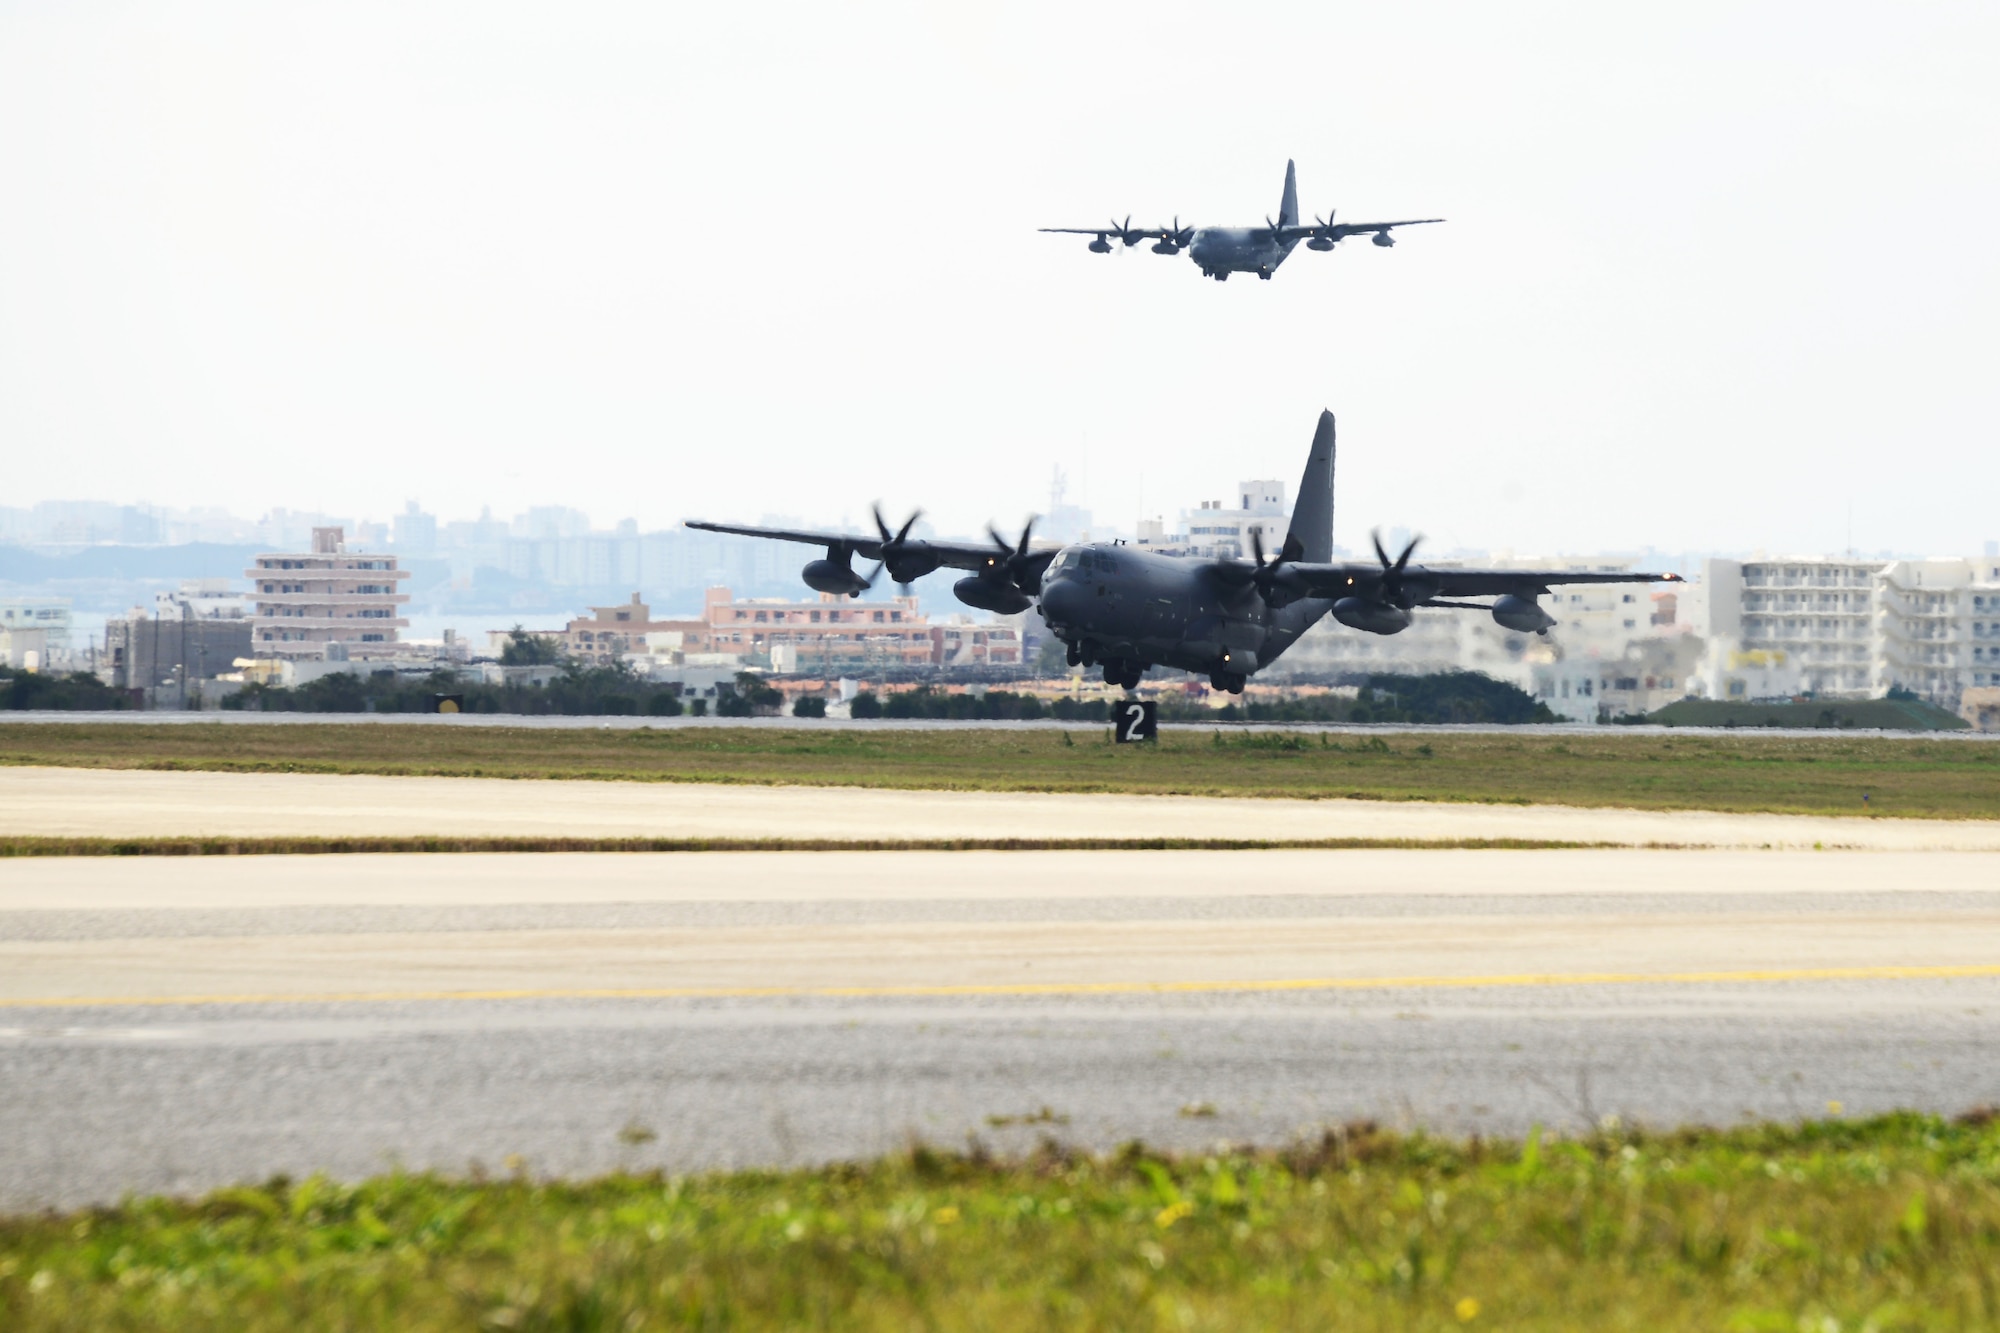 An MC-130J Commando II assigned to the 17th Special Operations Squadron lands at Kadena Air Base, Japan Feb. 17, 2016. The 17th SOS conducted a unit-wide training exercise which tasked the entire squadron with a quick-reaction, full-force sortie involving a five-ship formation flight, cargo drops, short runway landings and takeoffs, and helicopter air-to-air refueling. (U.S. Air Force photo/Master Sgt. Kristine Dreyer)